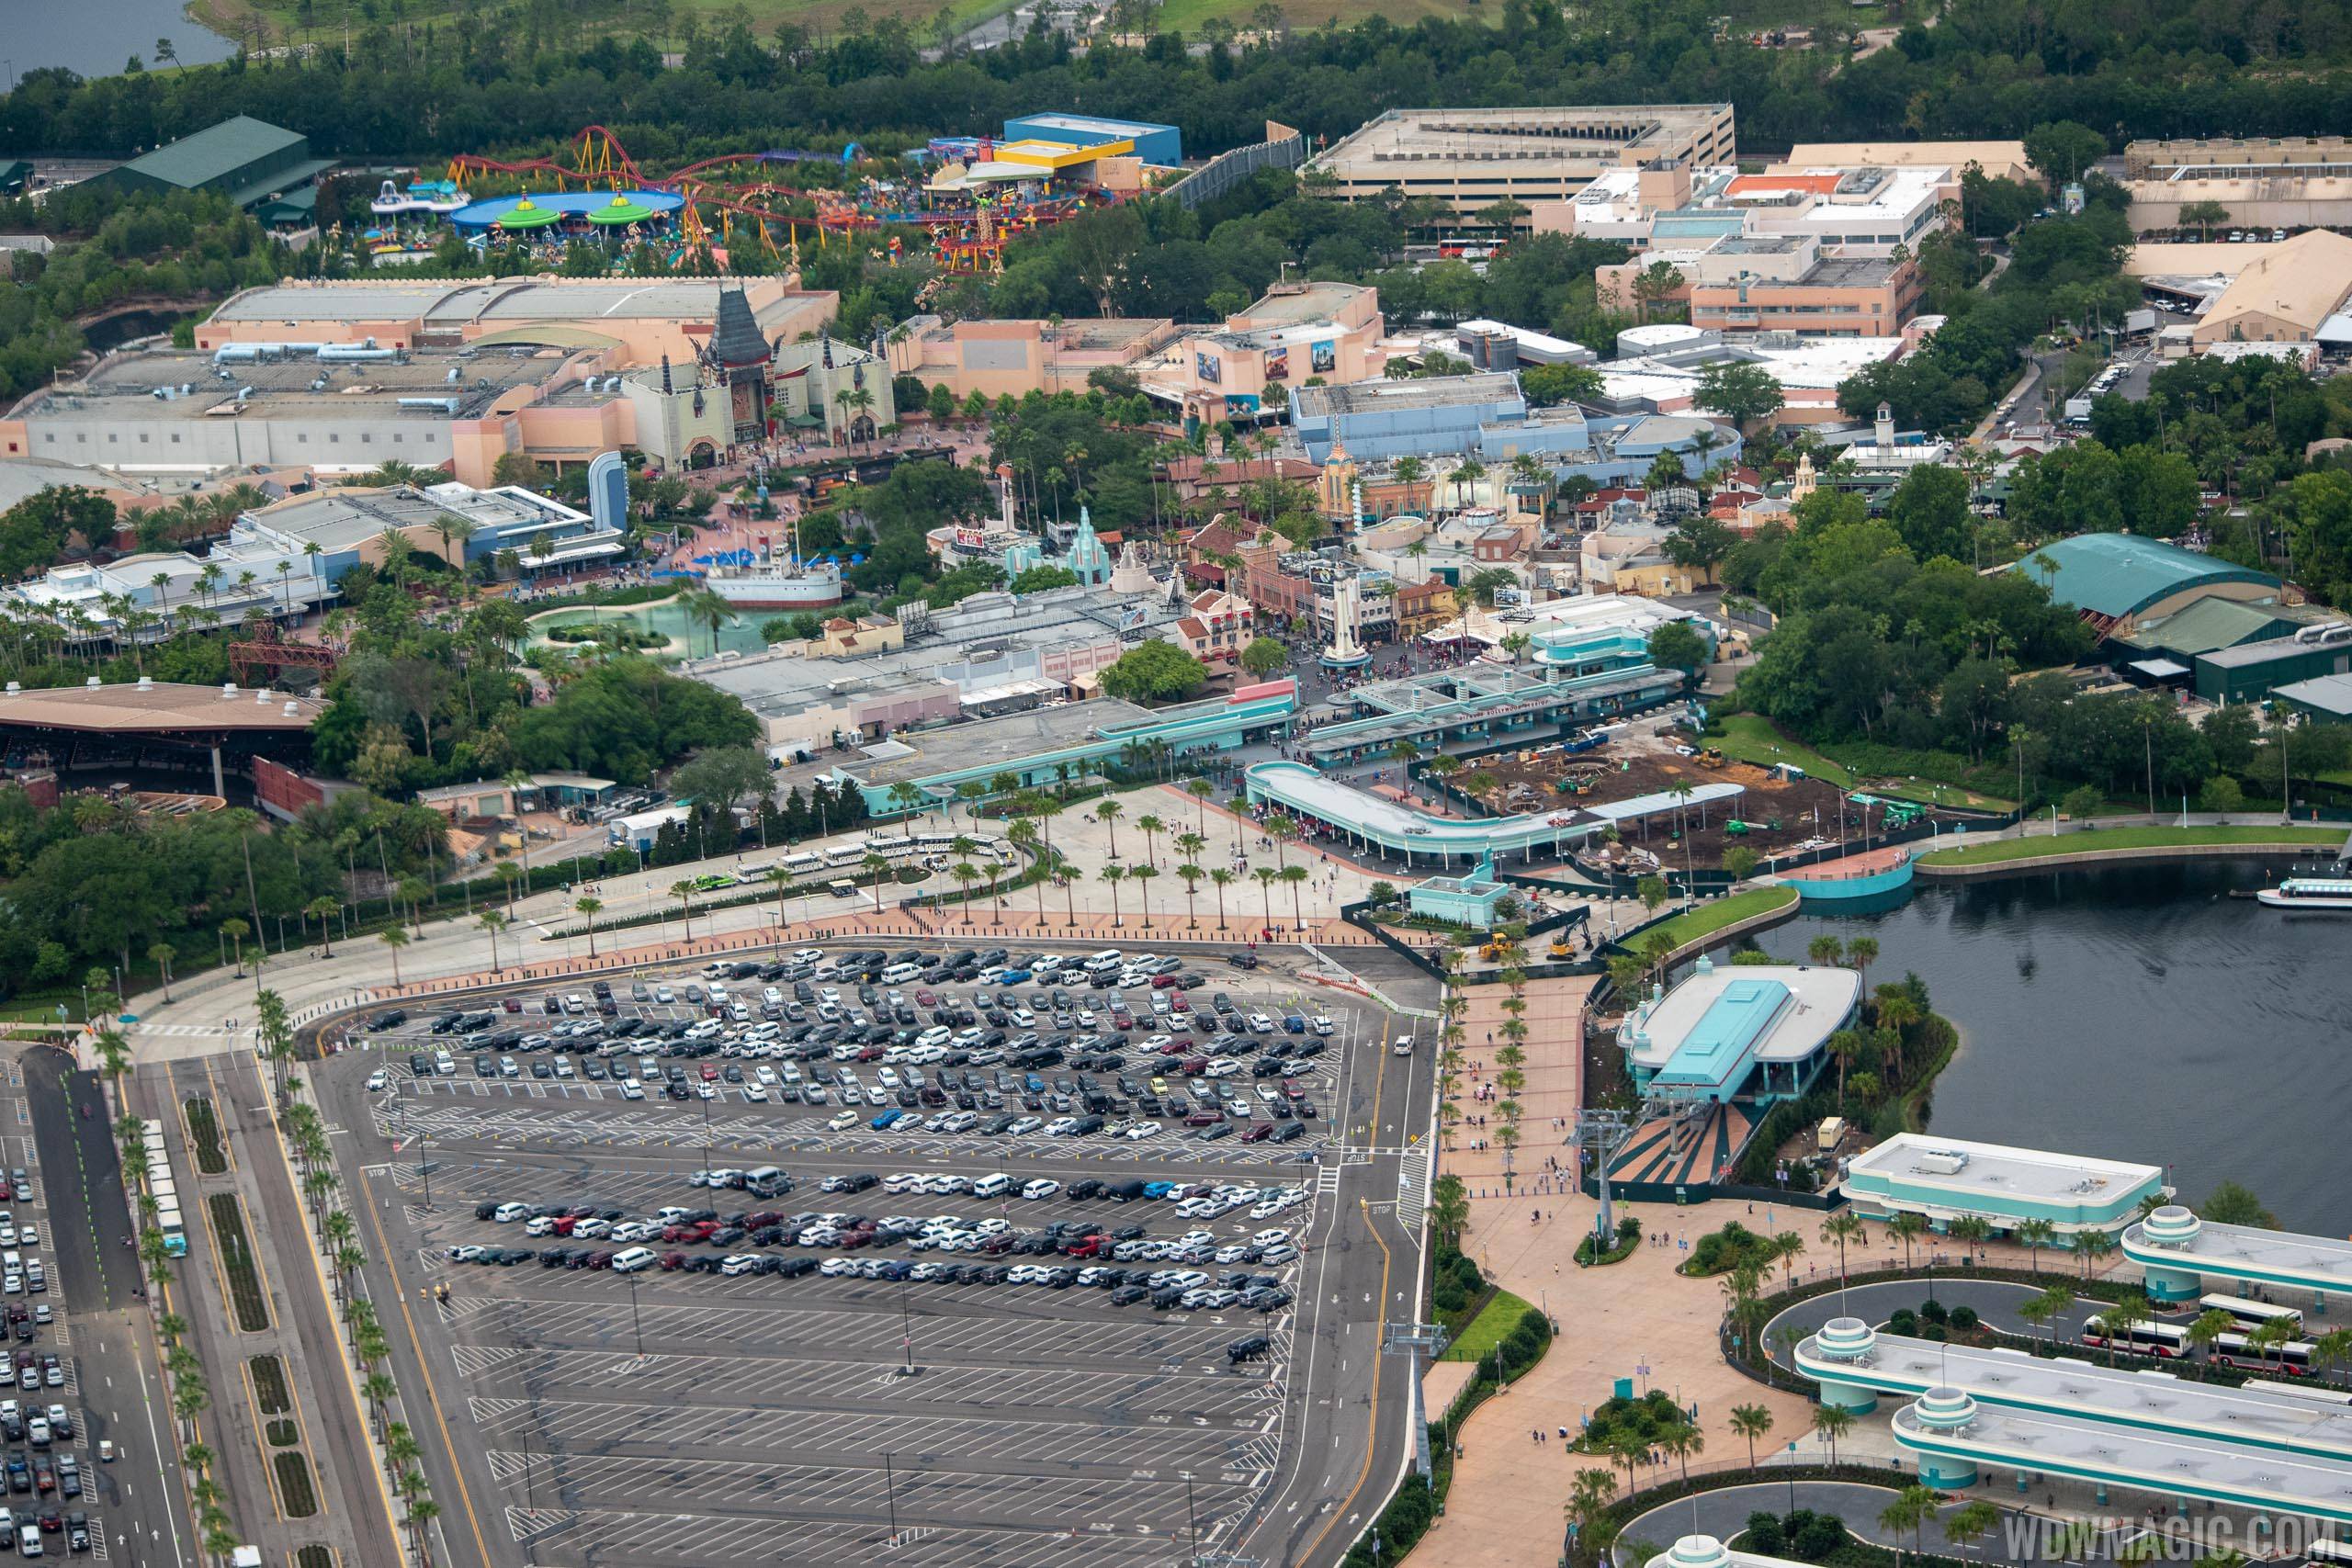 Main entrance construction from the air - June 2019